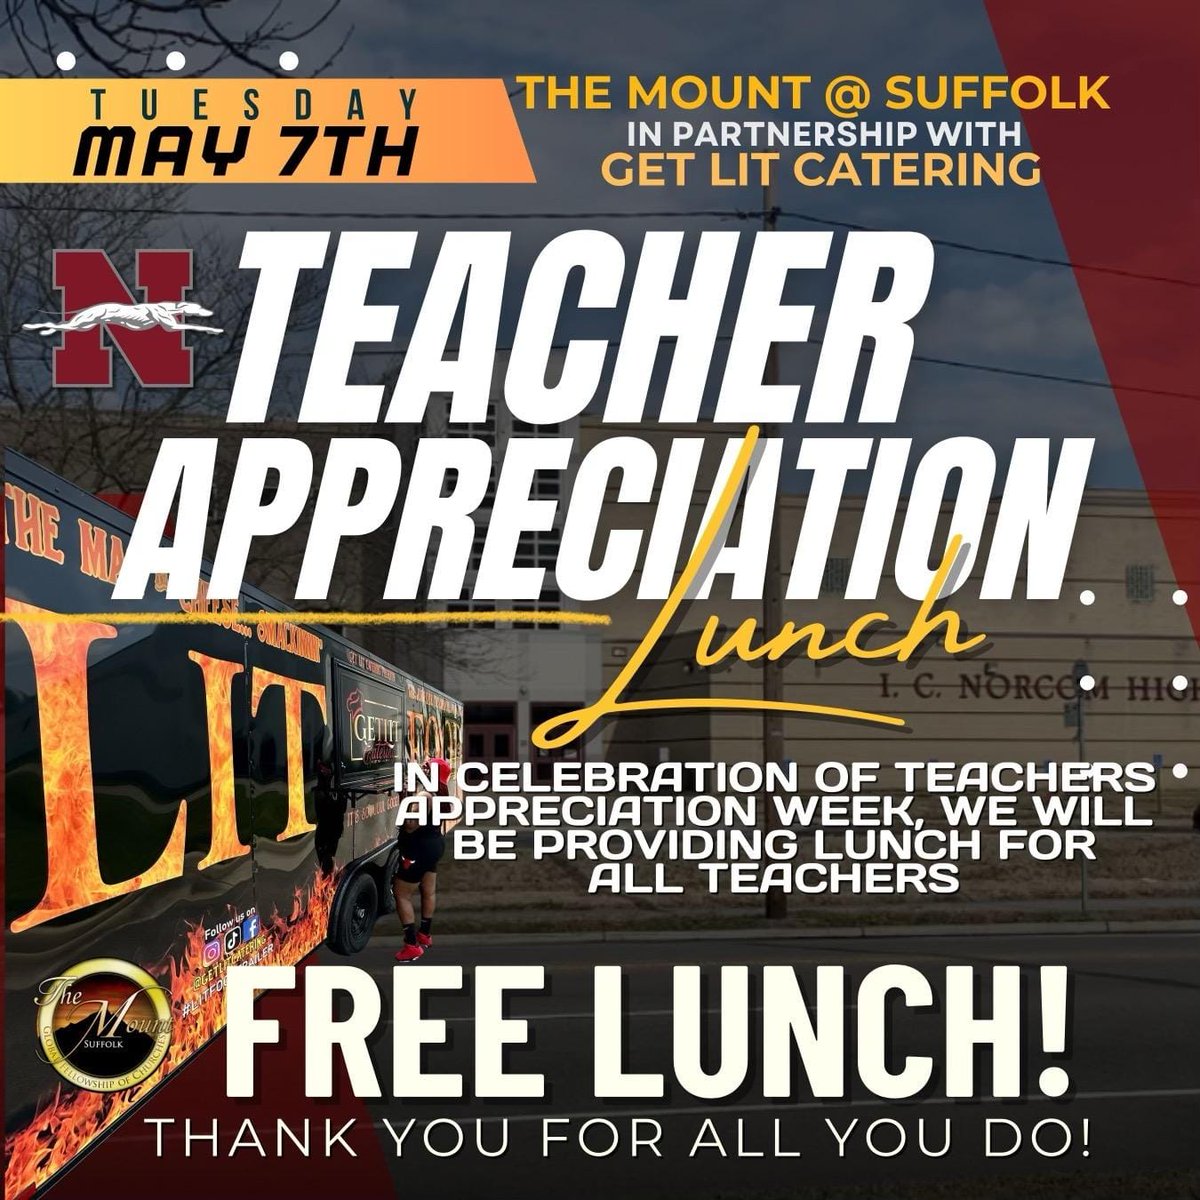 The Mount Suffolk will be providing free lunch to all our Norcom teachers on Tuesday, May 7th in honor of Teachers Appreciation Week! #ThankYou @themountleads